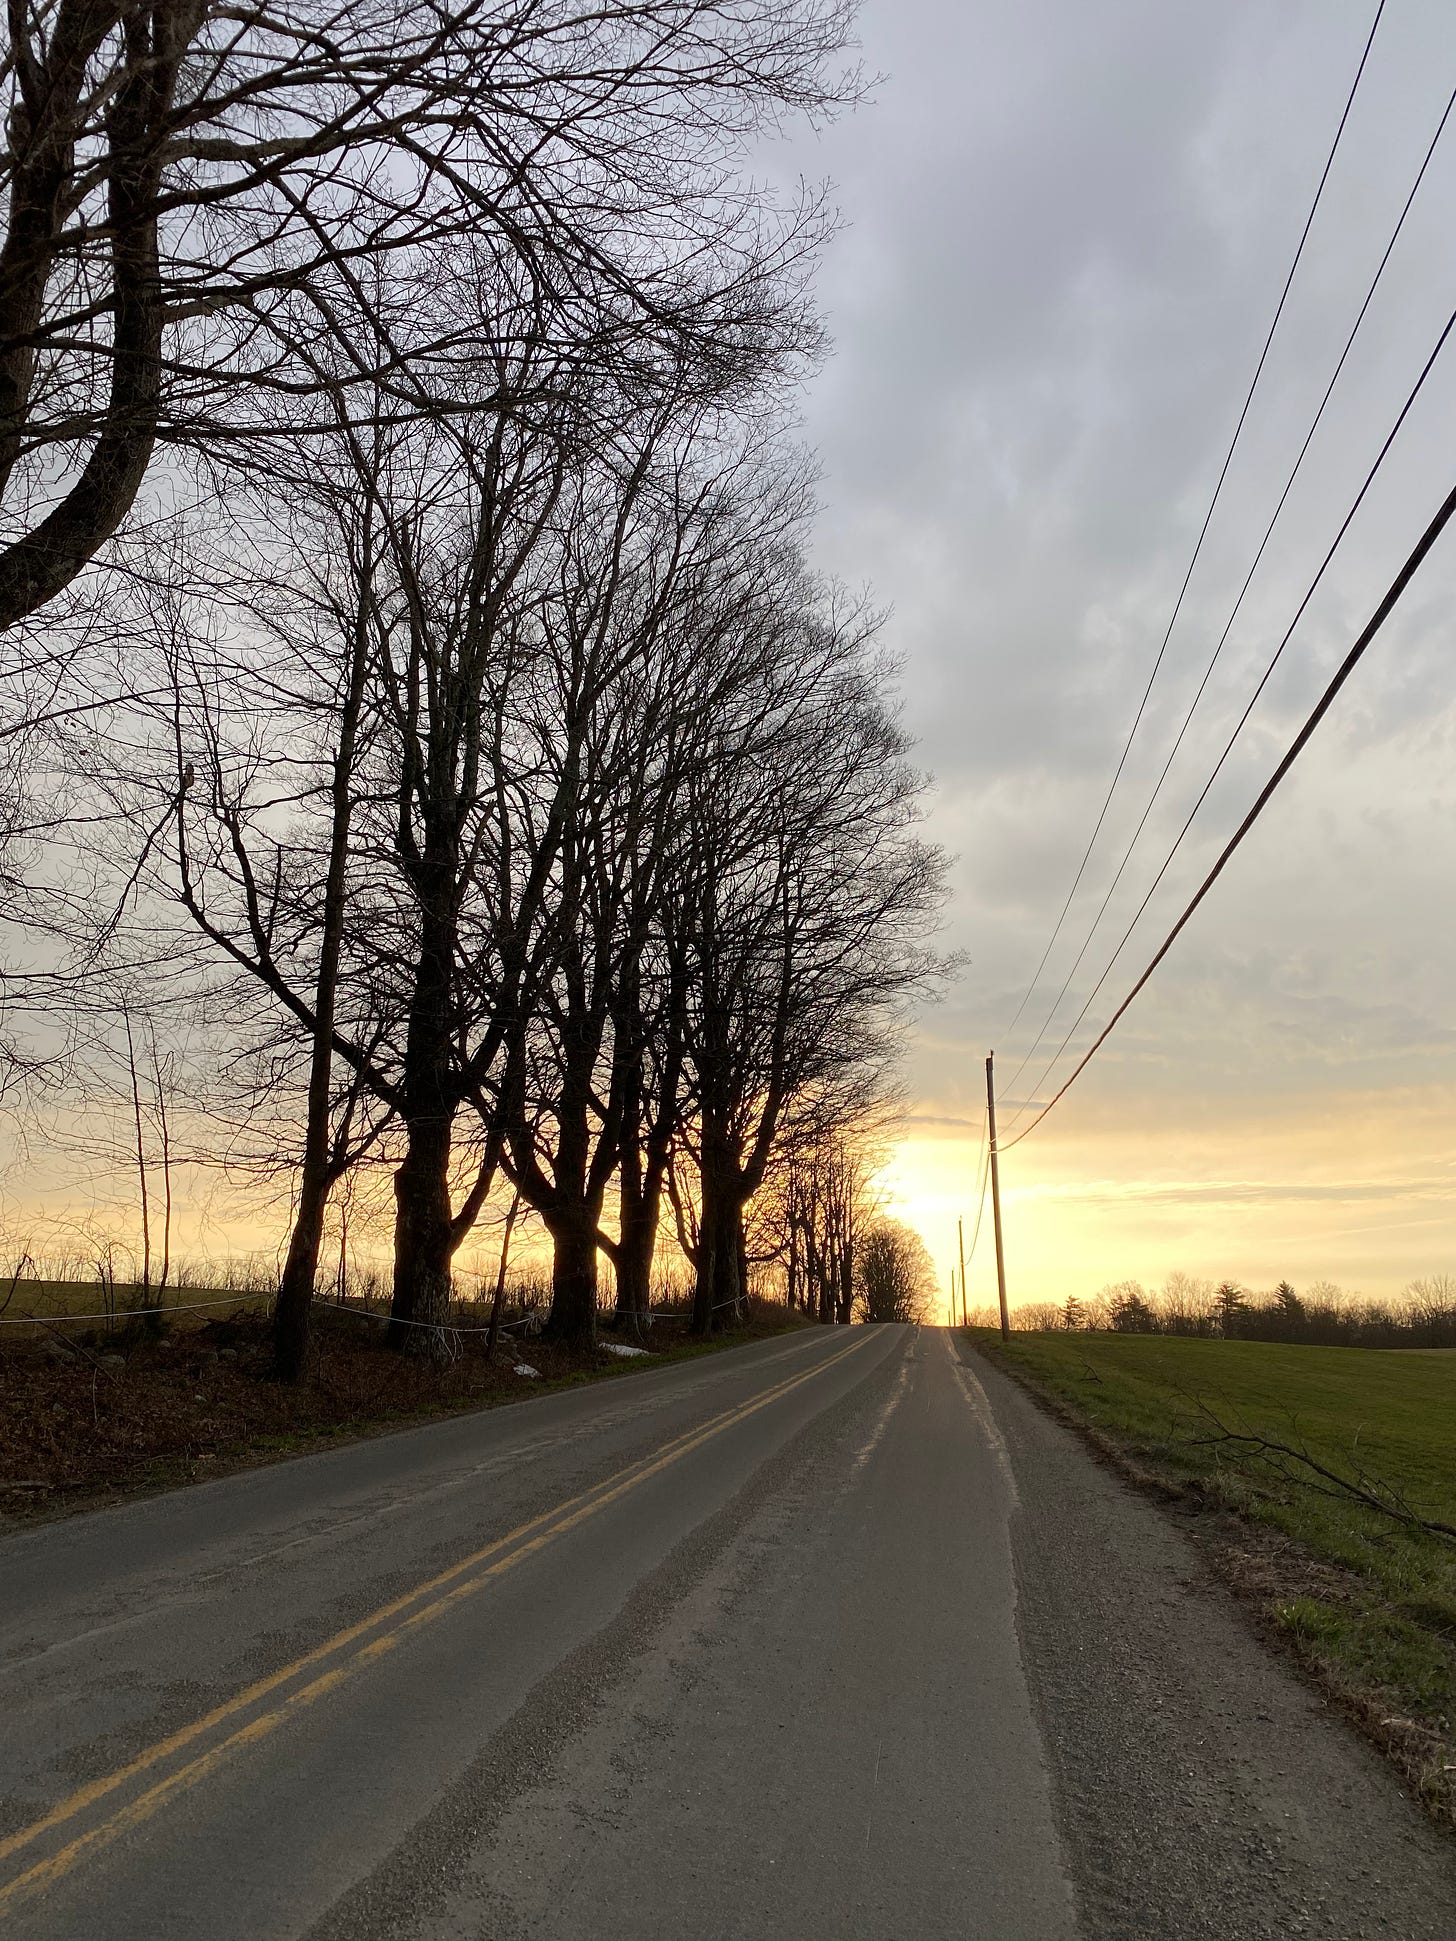 A paved road up a hill at sunrise: dark trees along the left, a green field on the right, and the sun a gold blur on the horizon under a dark cloudy sky.